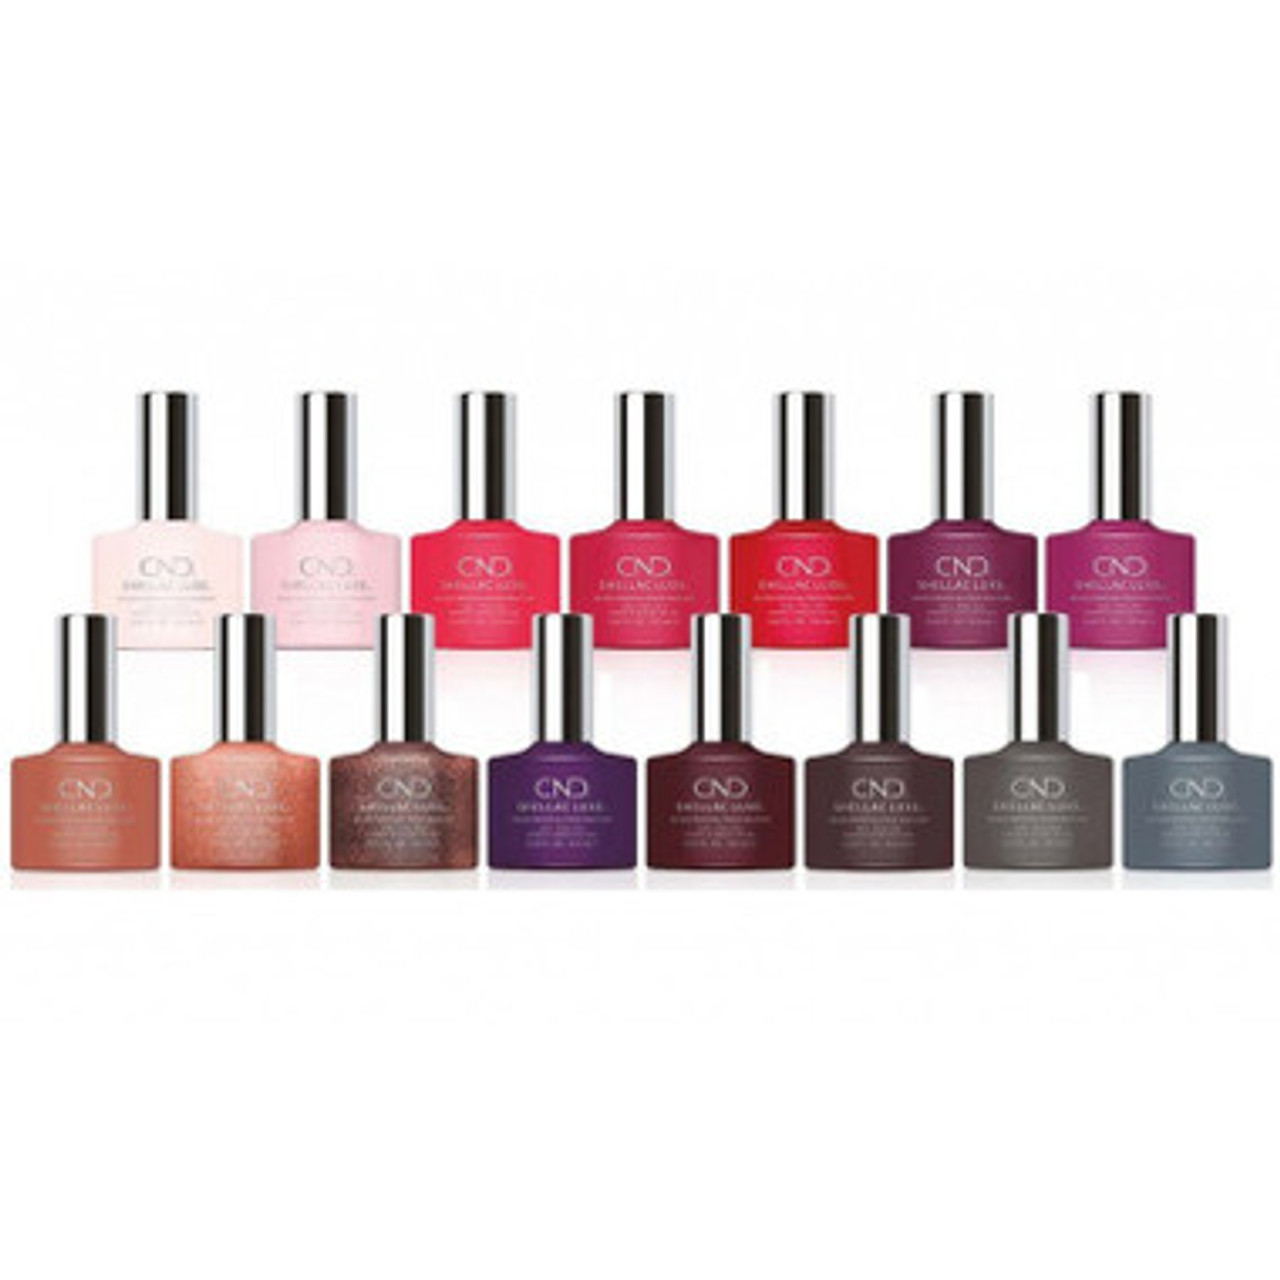 CND Shellac Luxe Gel Polish Overstock Clearance @ 60% OFF